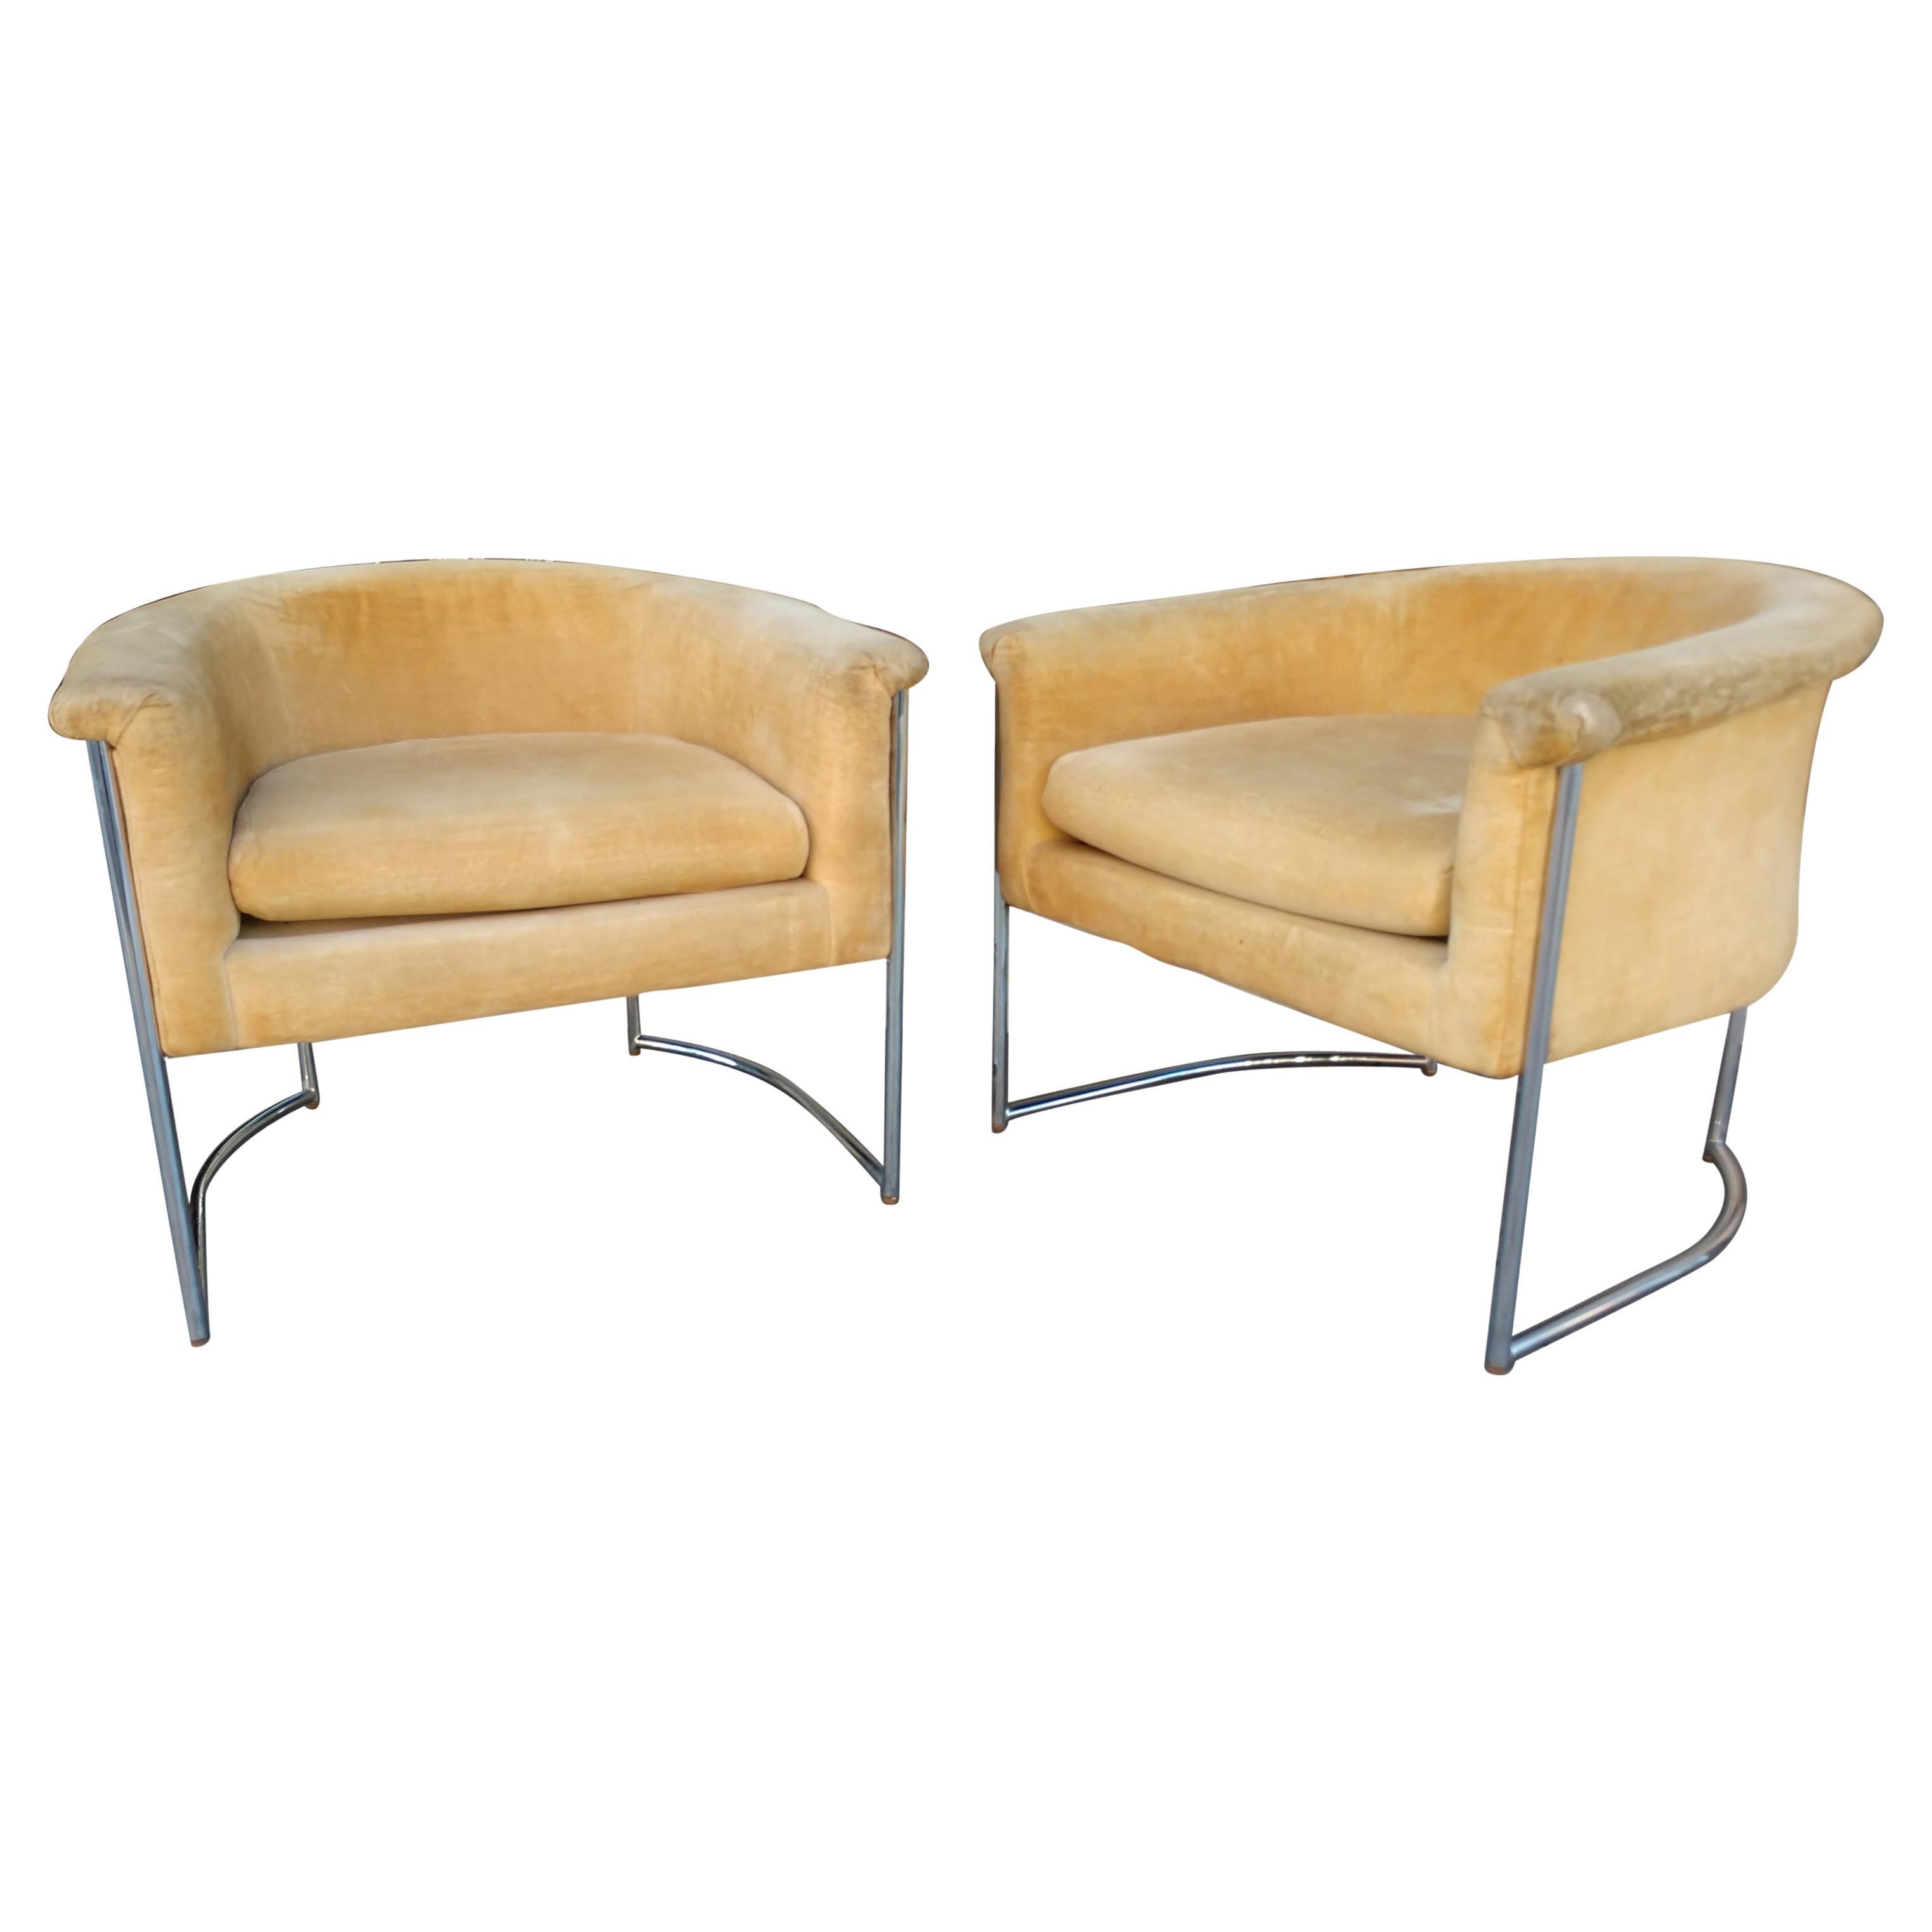 Upholstery Pair of Mid-Century Modern Barrel Back Lounge Chairs For Sale